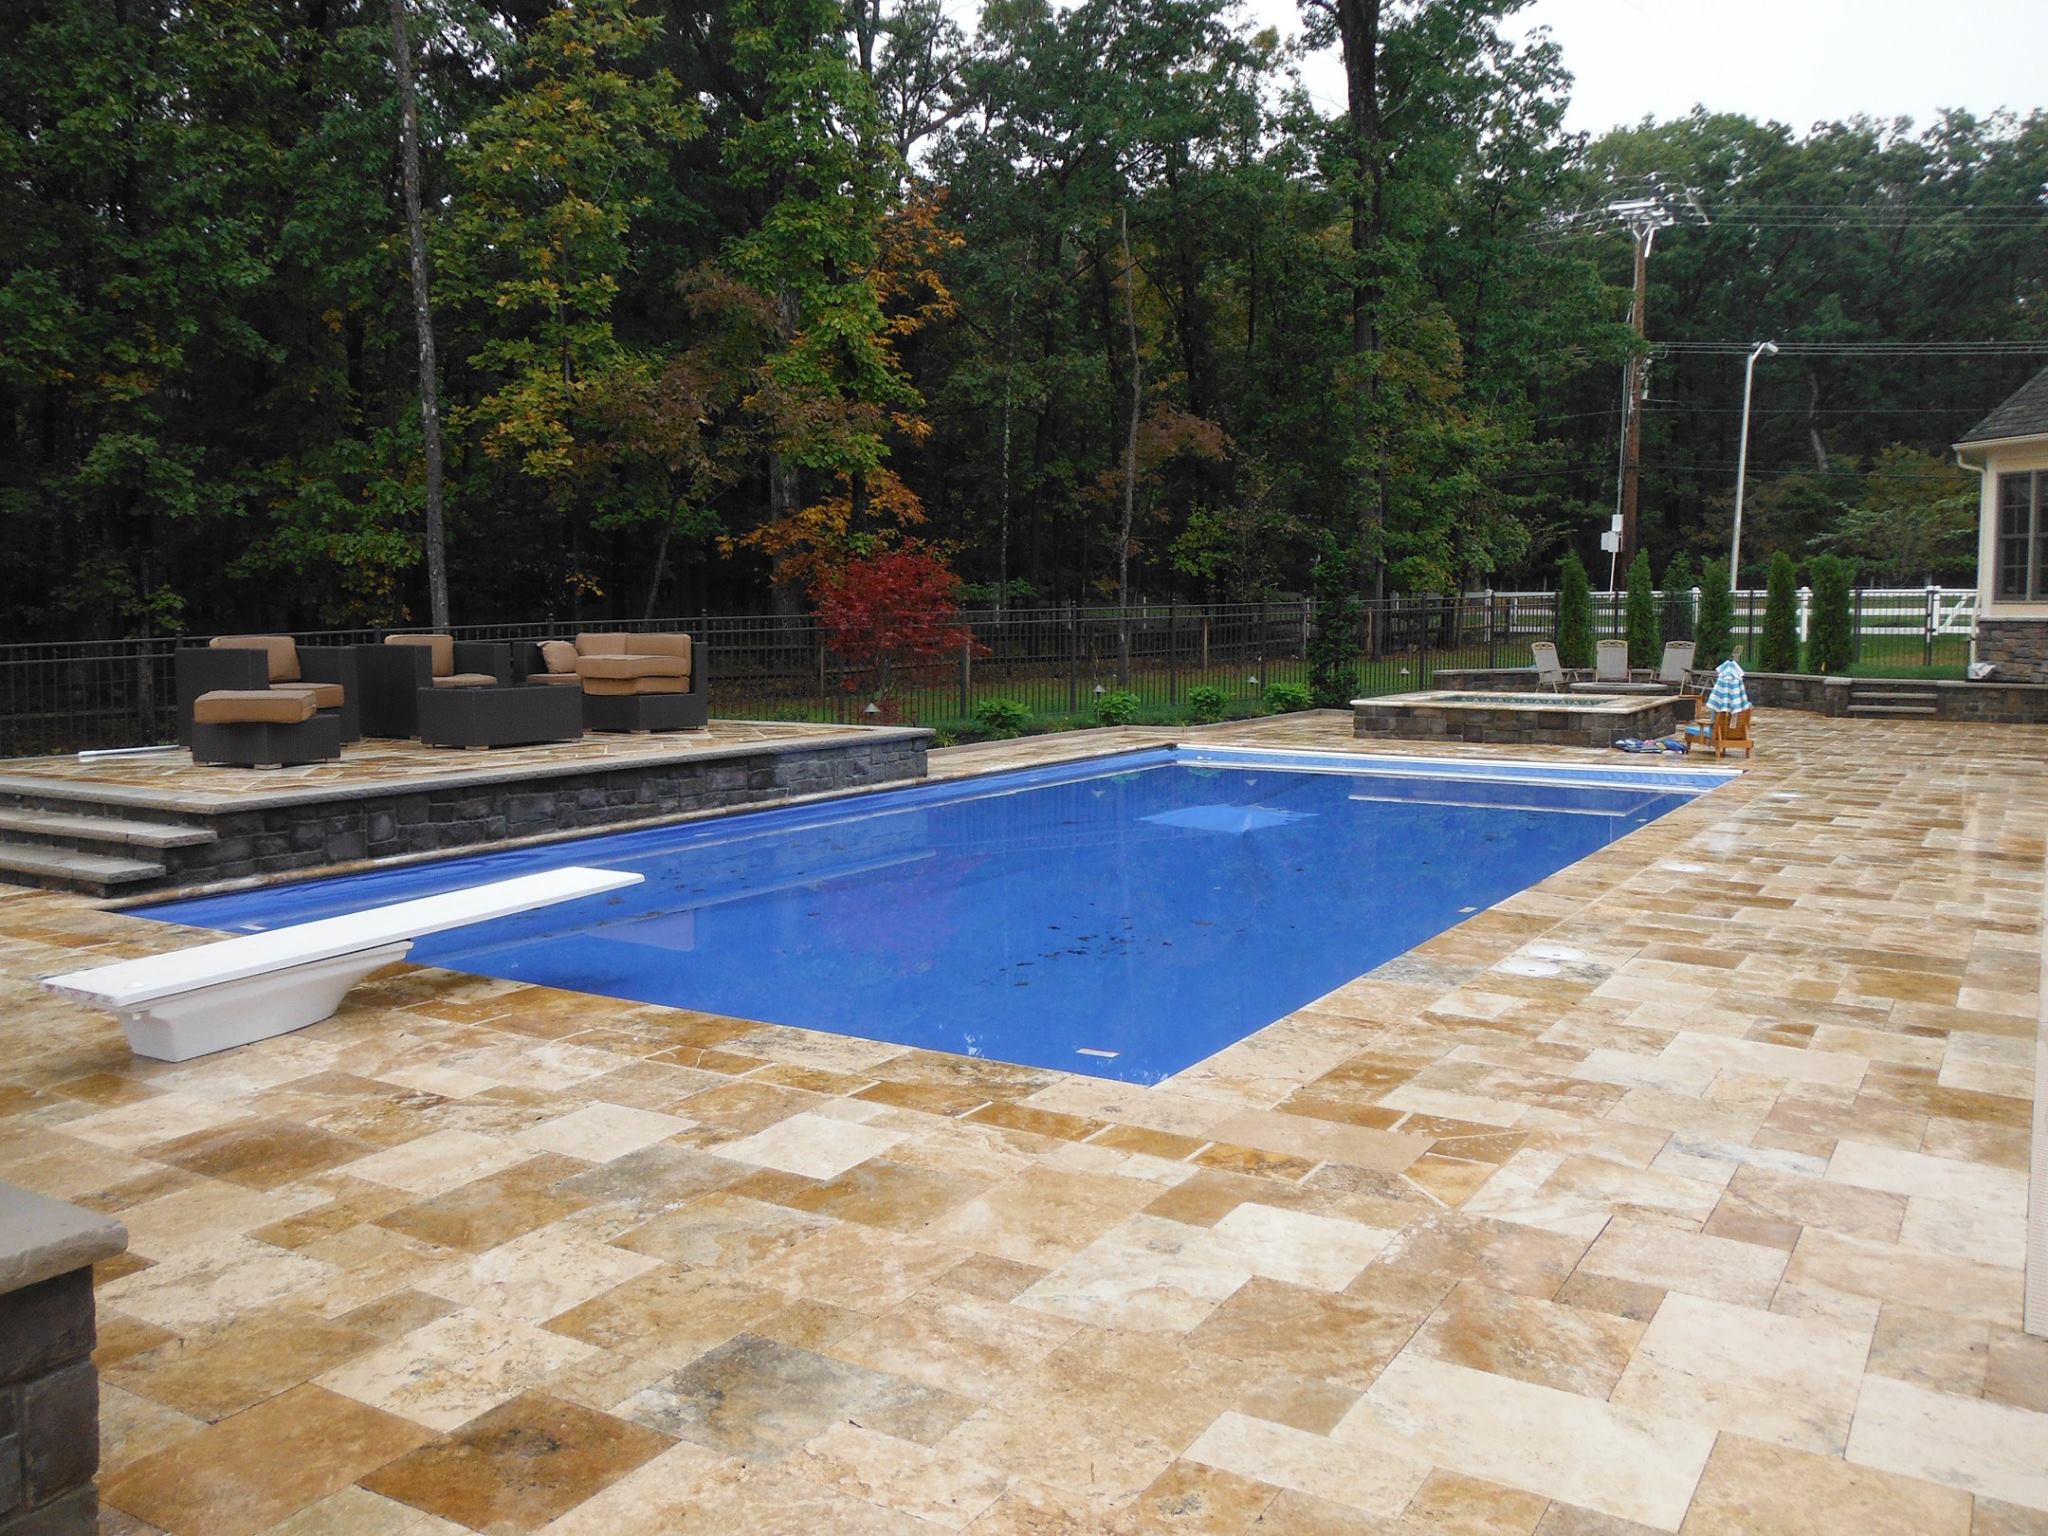 If you’ve ever wanted to have the fun and relaxation of a day at the pool without the hassle of packing up the car and dealing with the crowds, Leisure Contracting, LLC is the place for you! The fiberglass pool installation experts at Leisure Contracting have over 20 years of expertise in the industry – simply put, no one knows backyard pools better than they do! One of the hallmarks of their success is their timeliness and their dedication to customer service at every step of the pool installation process. changing your pool area from a watery hole in the ground to a true backyard oasis! Contact Leisure Contracting, LLC today for free estimates! 4102422264 support@leisurecontracting.com http://www.leisurecontracting.com/